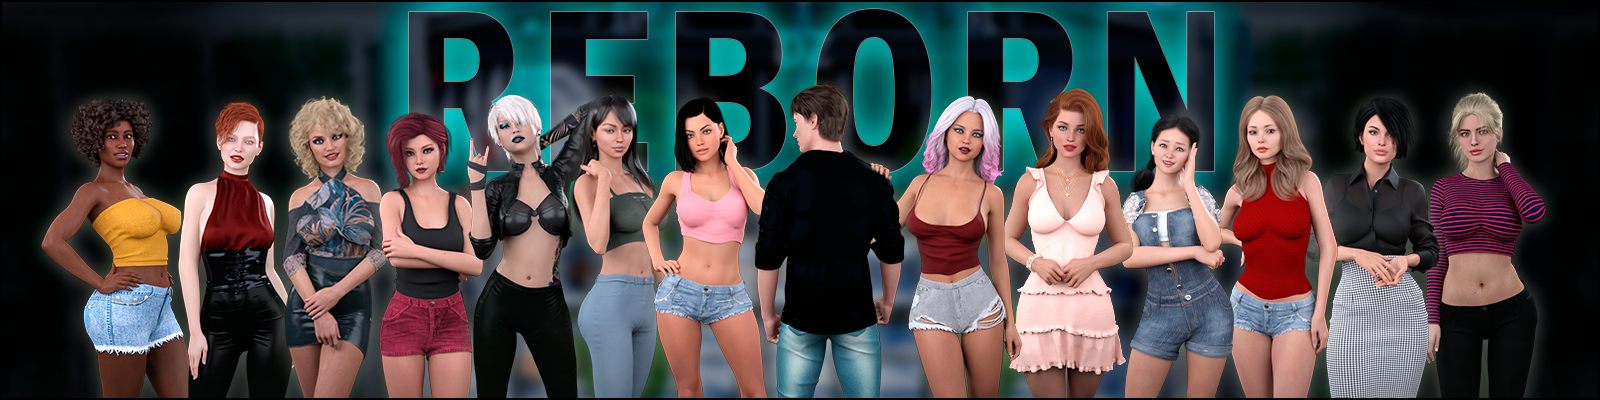 Reborn [Woundead] Adult xxx Game Download